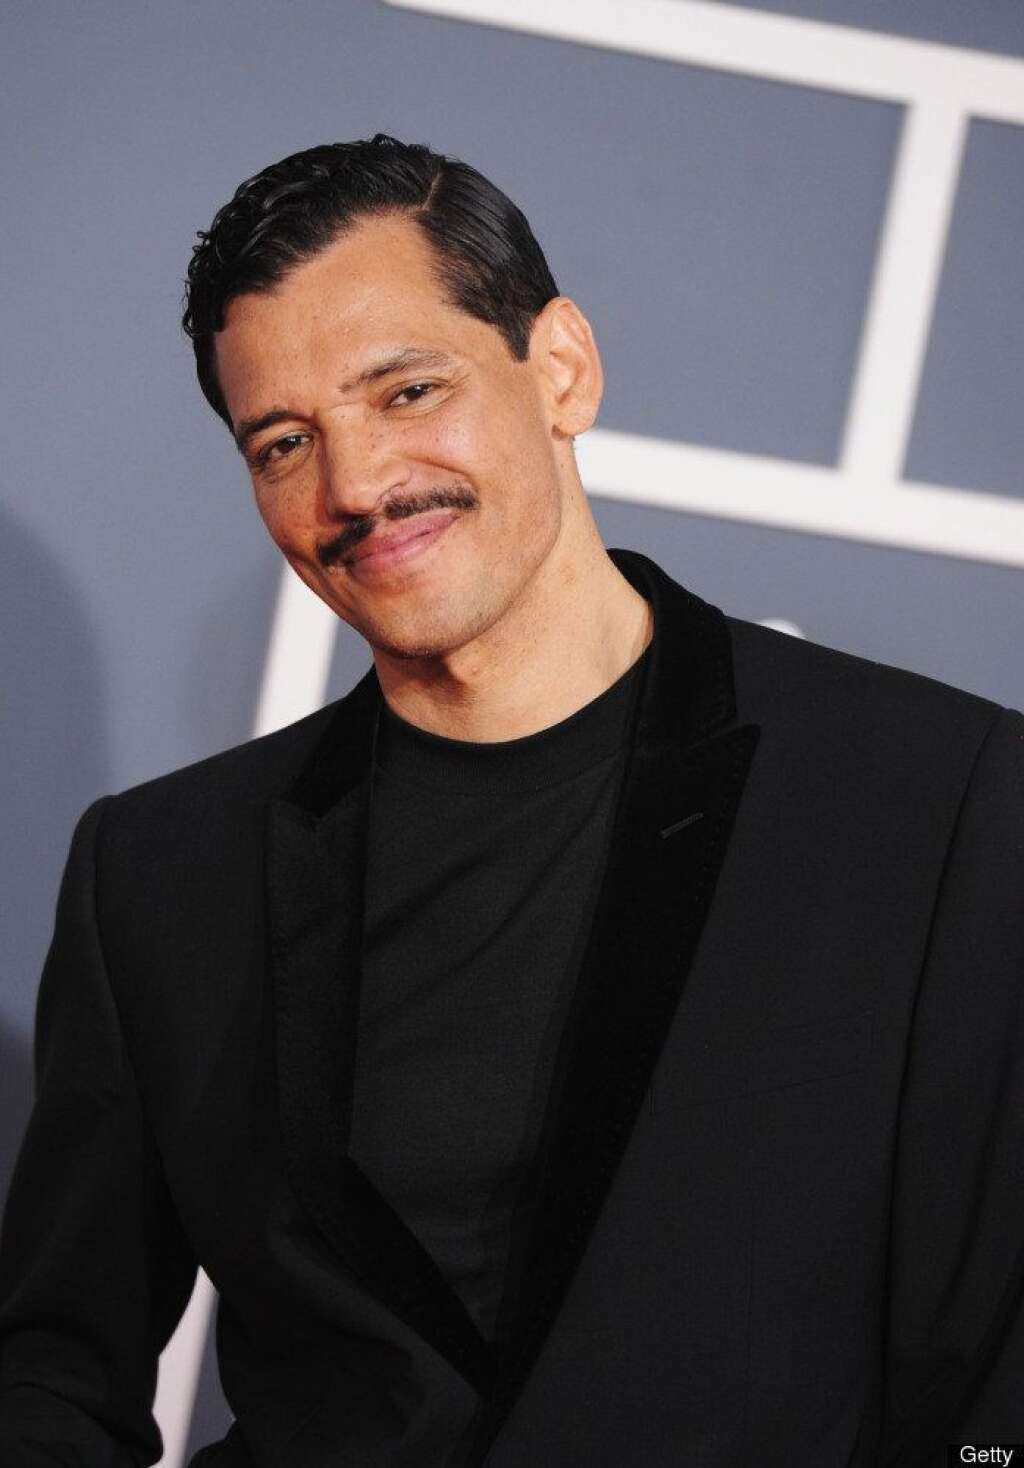 El DeBarge - Singer El DeBarge <a href="http://www.vibe.com/posts/nas-irs-debt-totals-more-3-million" target="_hplink">owed $354,000 in delinquent federal taxes</a> in 2010, according to Vibe.com.